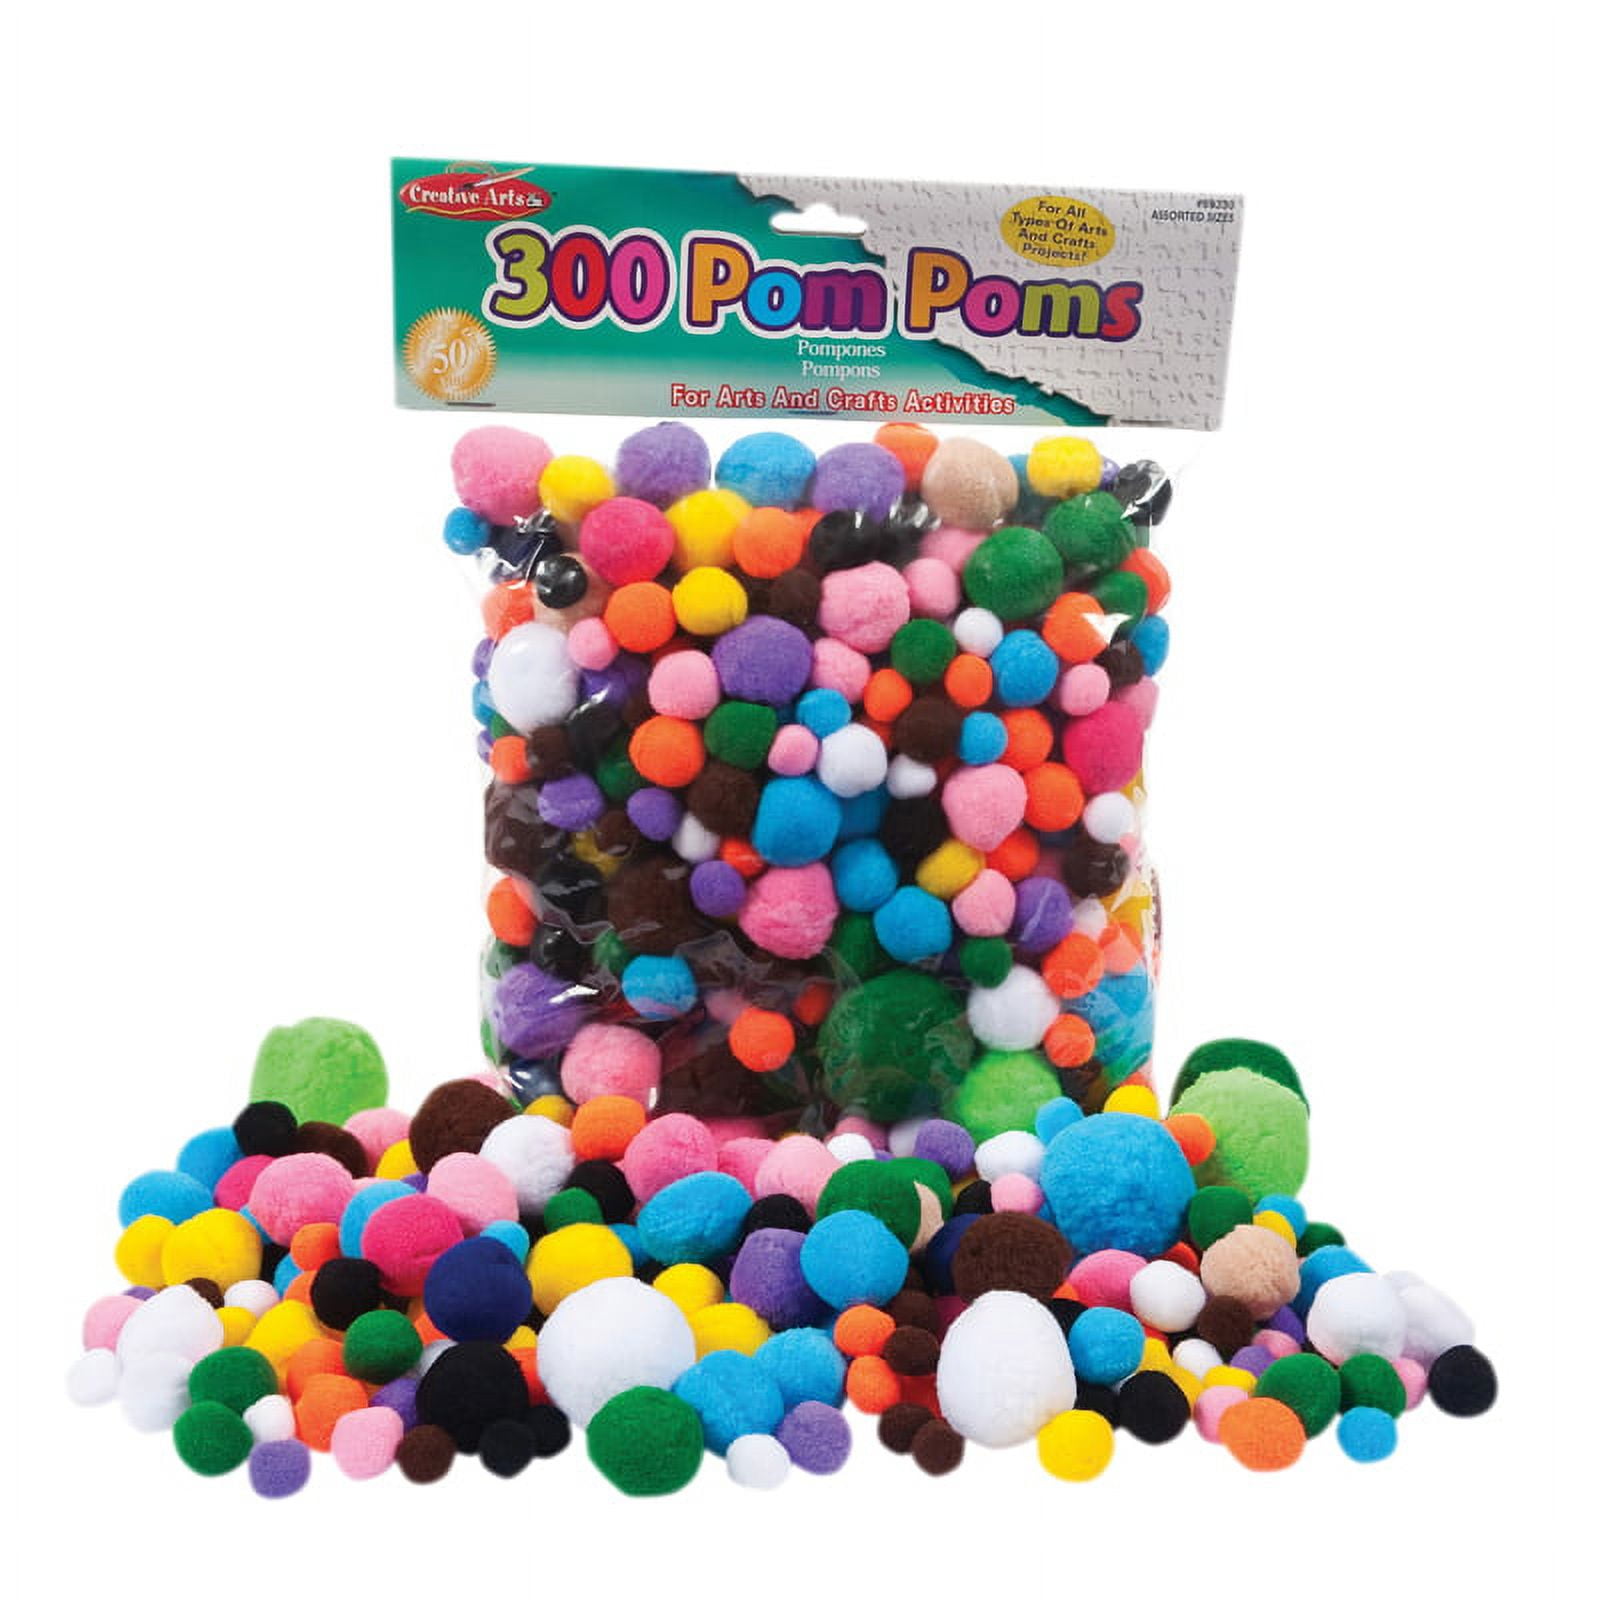  Kare & Kind 300 pcs Pom Poms - Assorted Colors - 2.5 cm - Good  for Arts, Crafts and DIY Projects - Also for School Artworks, Decorations,  Costumes, Toys, Handmade Gifts